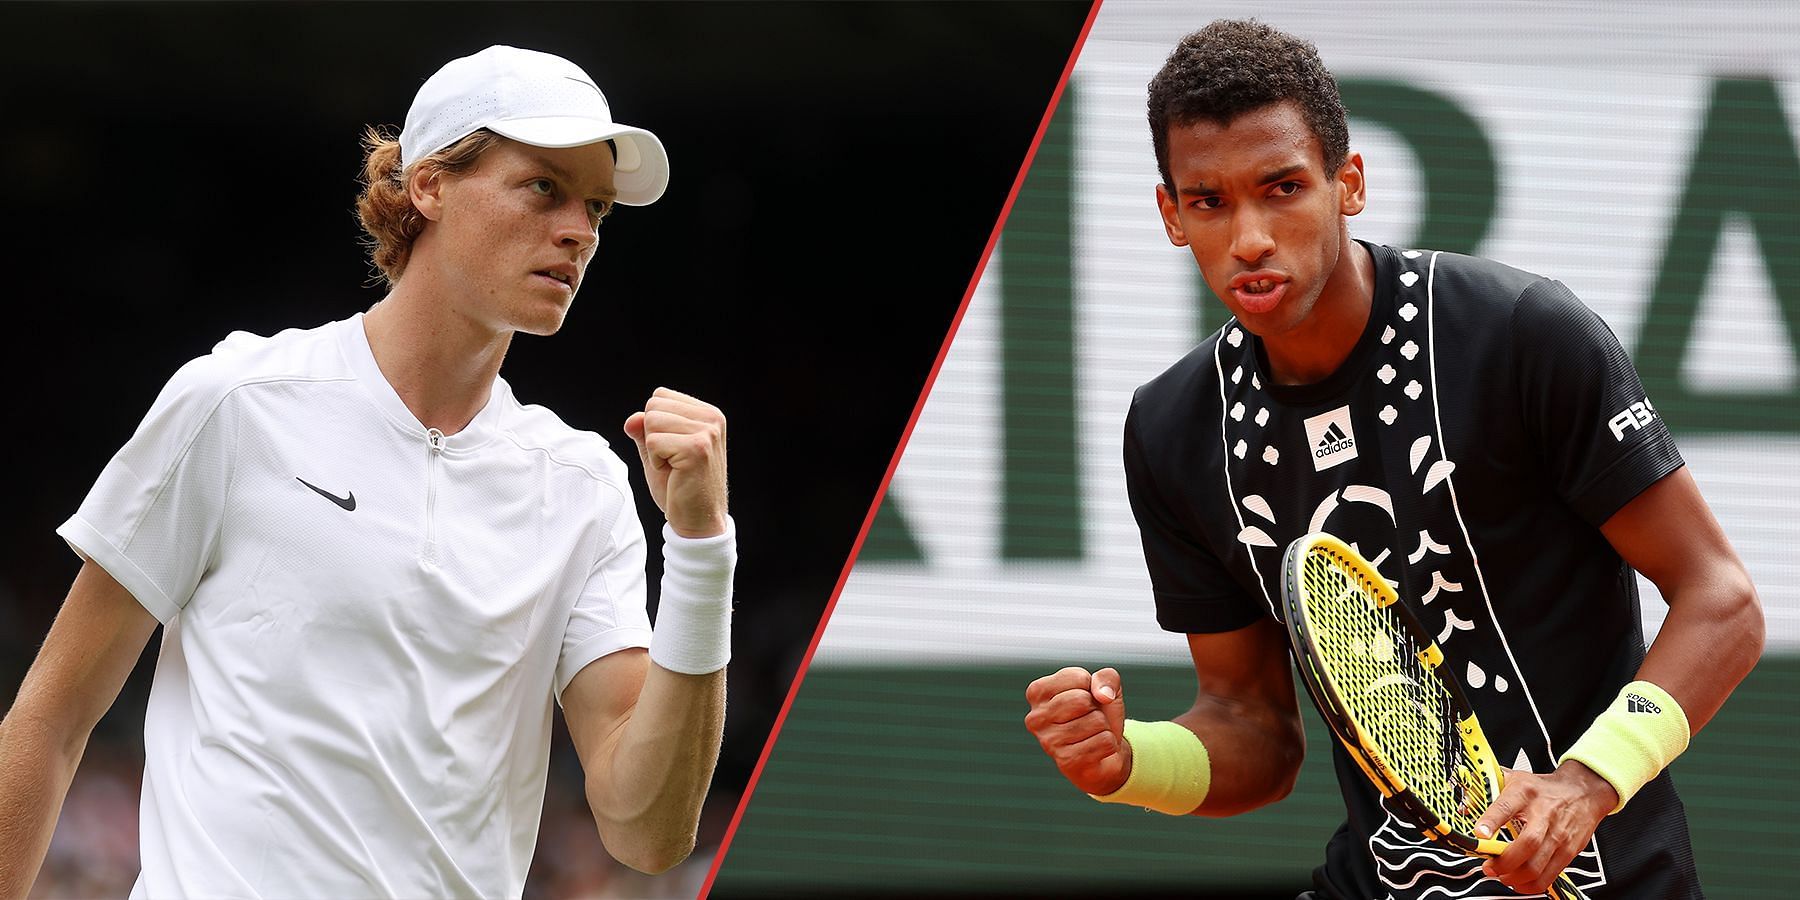 Felix Auger-Aliassime and Jannik Sinner will be in action on Day 4 of the &lt;a href=&#039;https://www.sportskeeda.com/go/montreal-masters&#039; target=&#039;_blank&#039; rel=&#039;noopener noreferrer&#039;&gt;Canadian Open&lt;/a&gt;